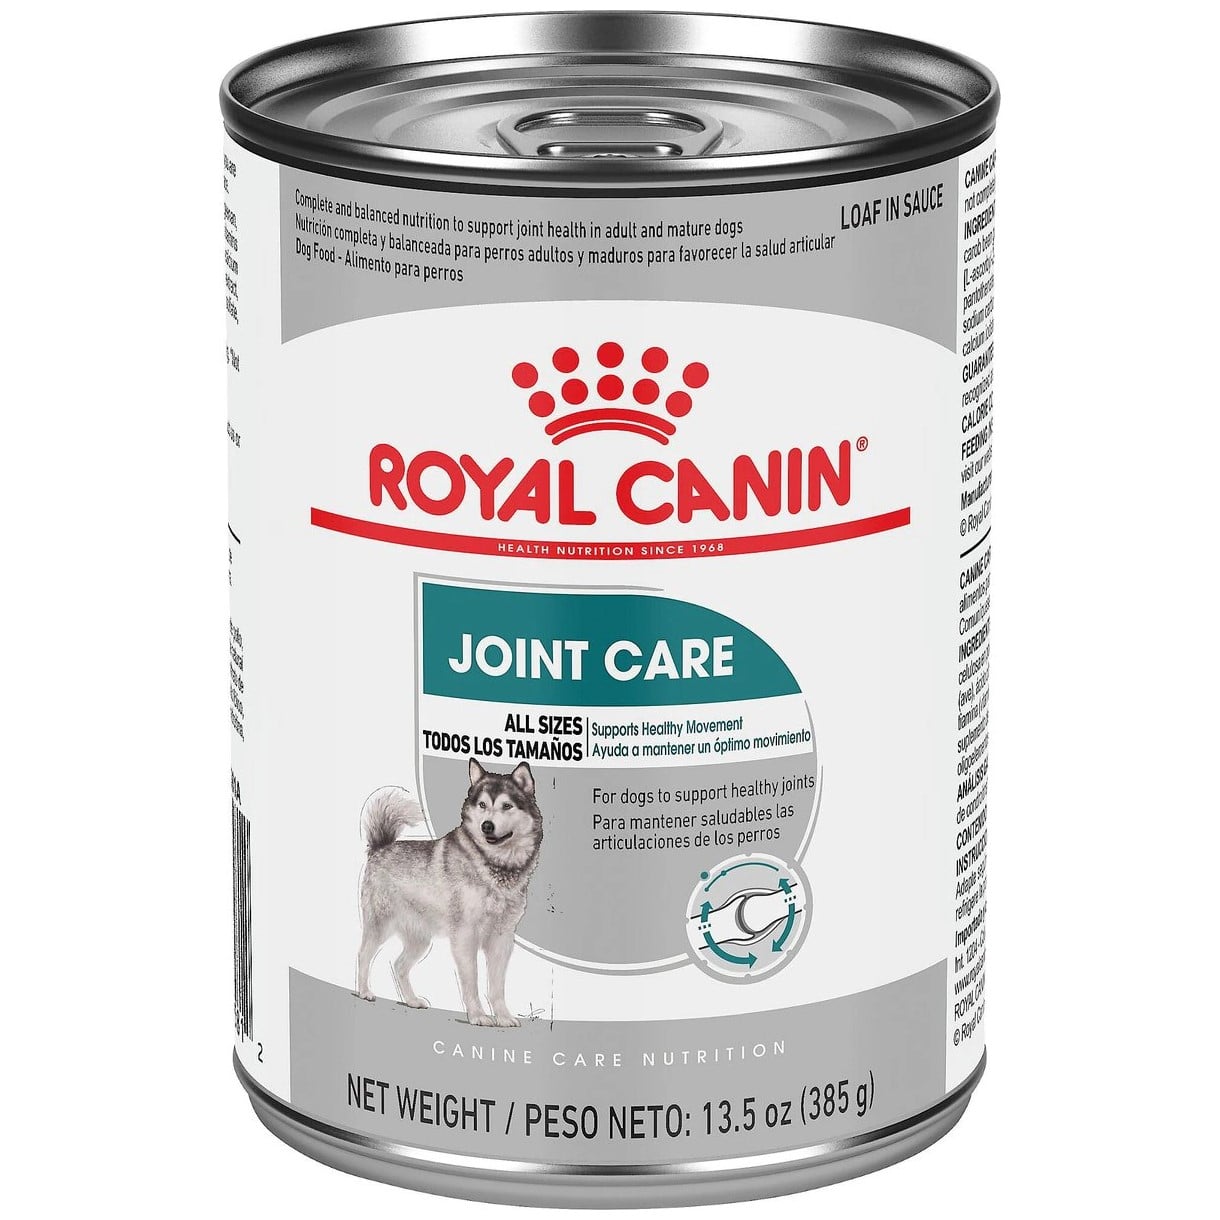 Royal Canin Canine Care Nutrition Joint Care Loaf in Sauce Canned Dog Food